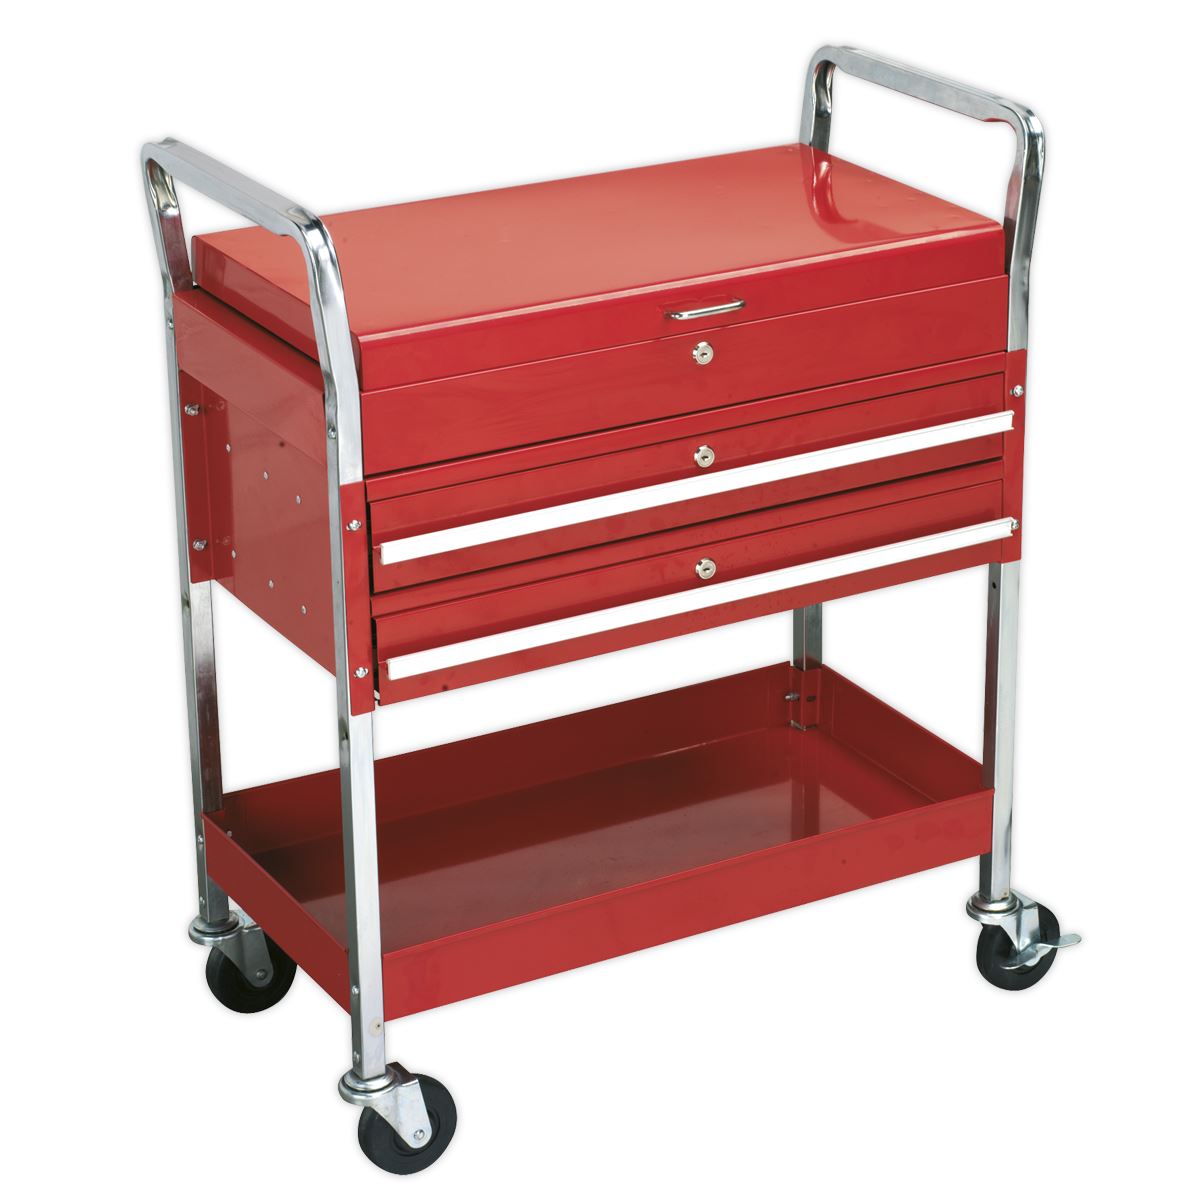 Sealey Superline Pro Trolley 2-Level Heavy-Duty with Lockable Top & 2 Drawers